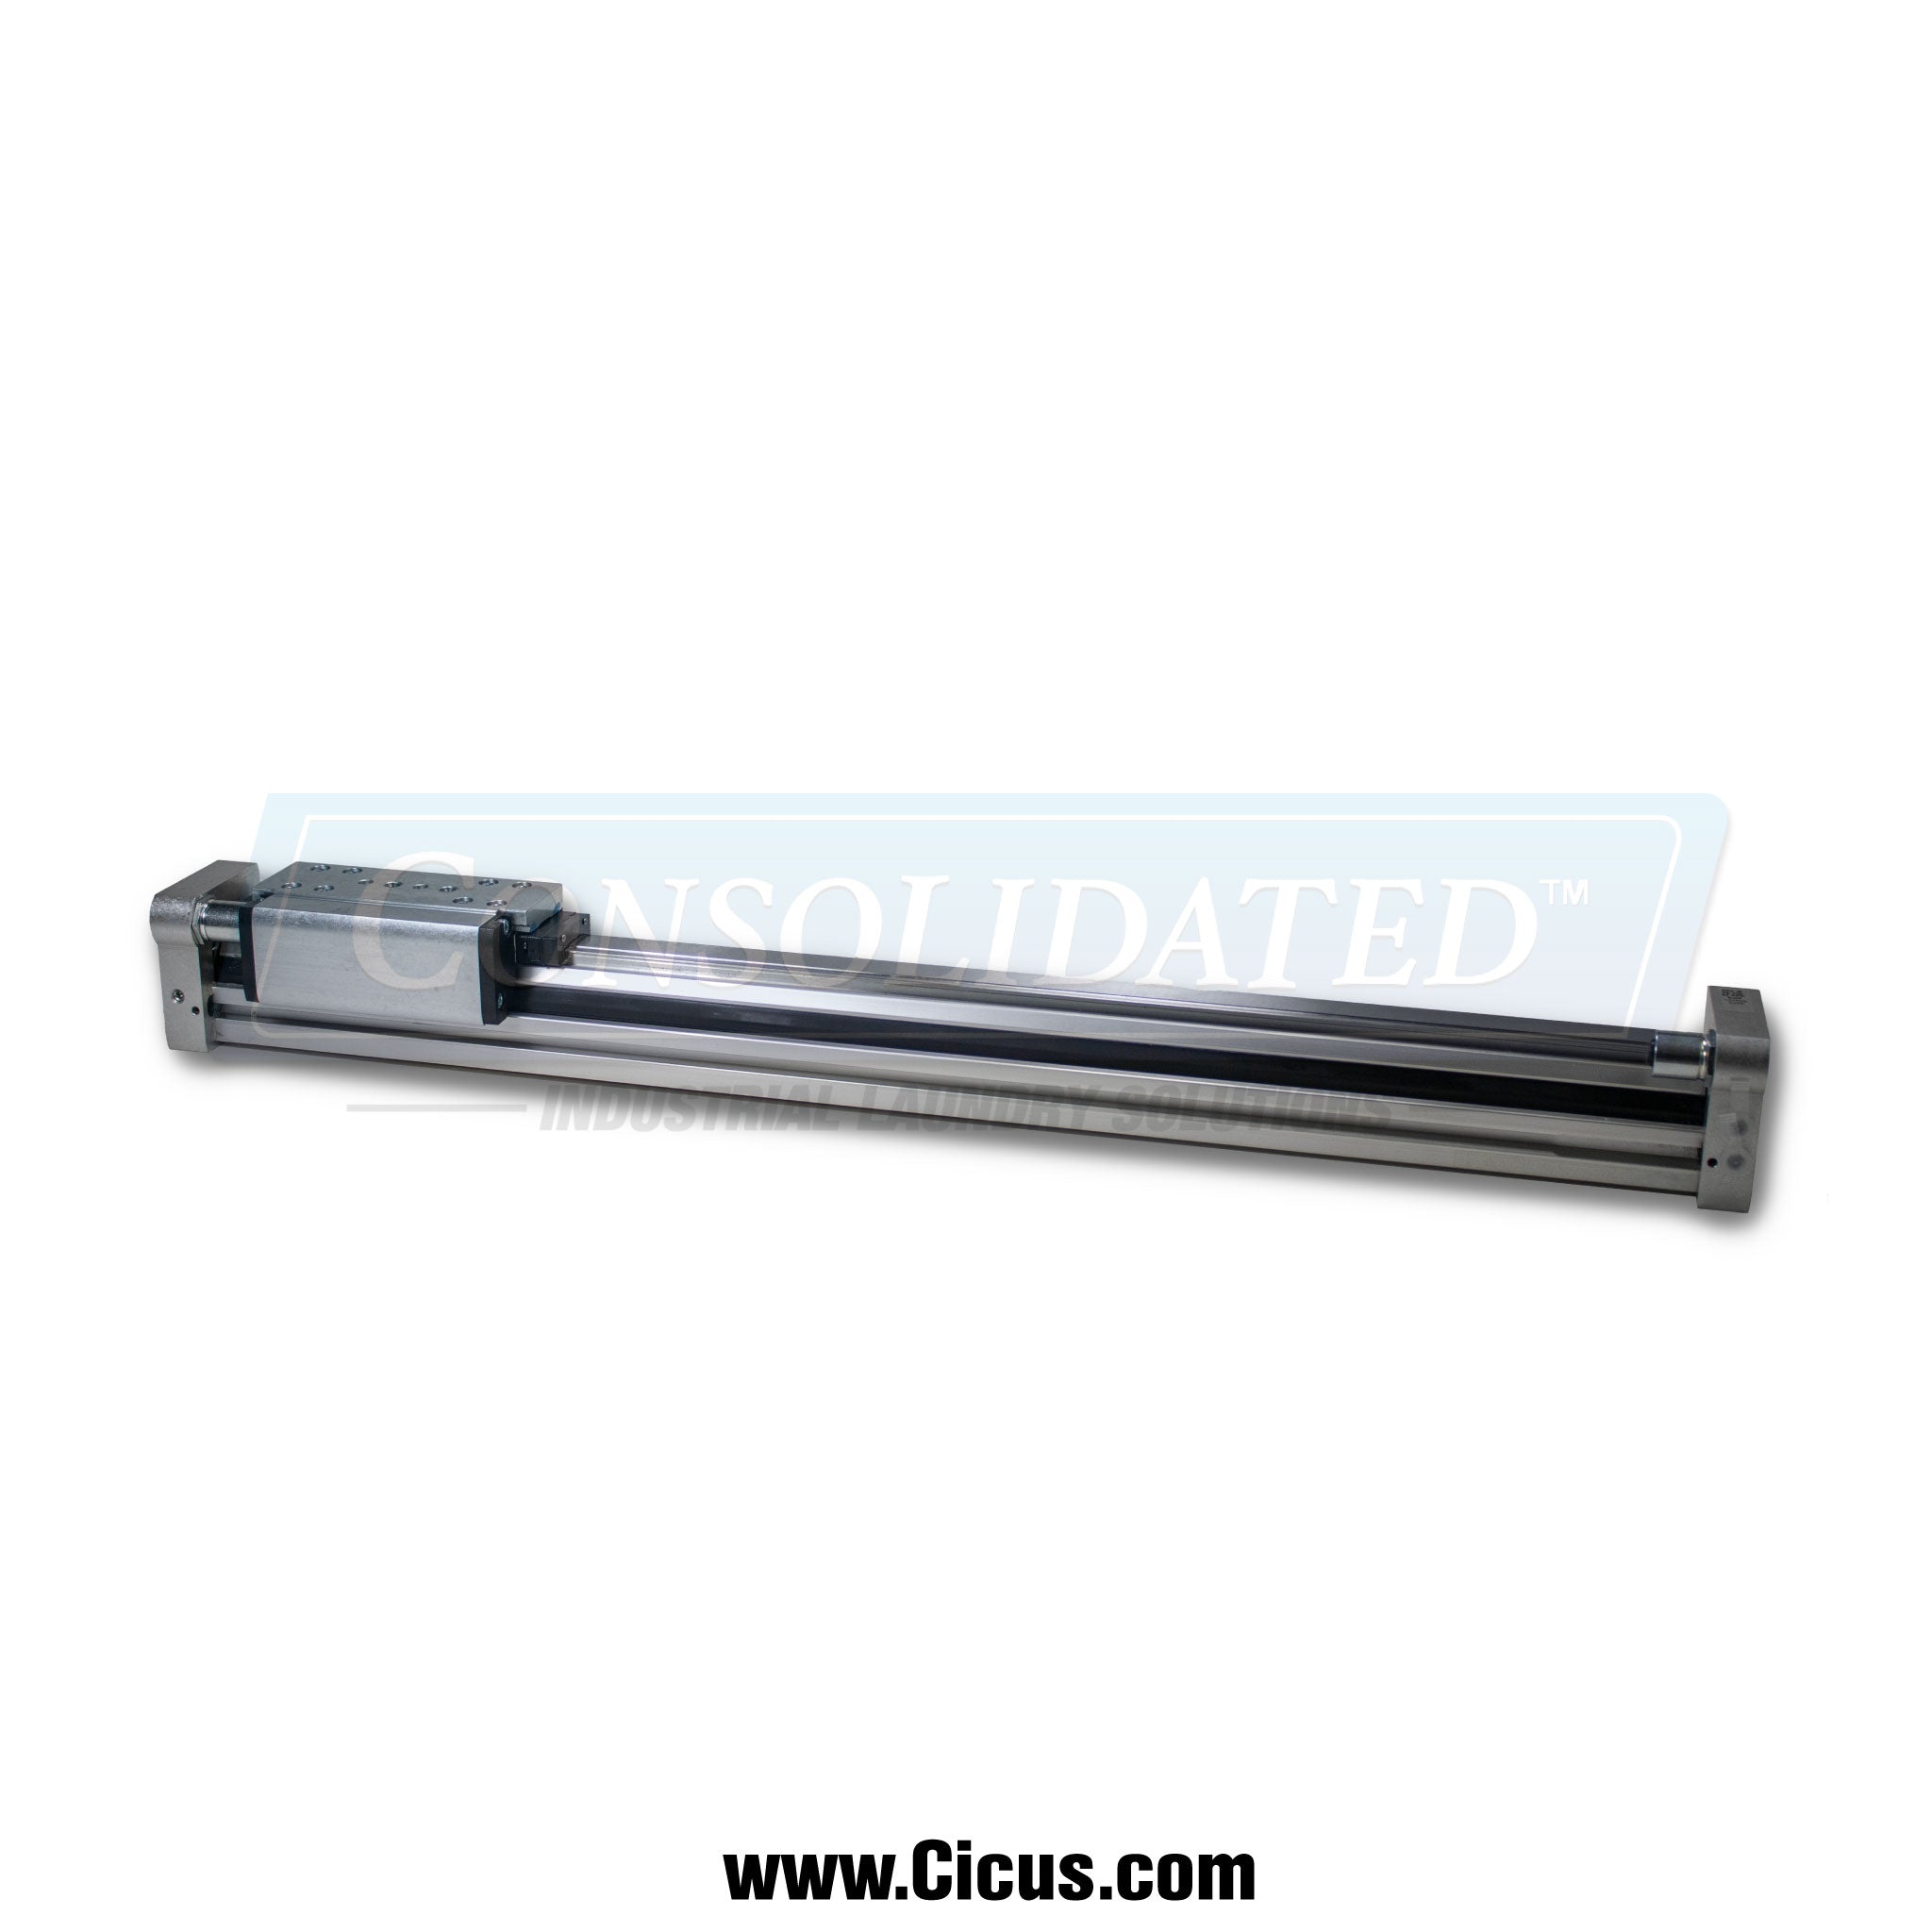 This image features the same Chicago Dryer Rodless Air Cylinder 18mm 14" Stroke [0208-518], but from a different angle, showing the entire length of the cylinder. It lies horizontally with mounting brackets visible on both ends. The "CONSOLIDATED™" watermark is again present, along with the "www.Cicus.com" website indication, emphasizing the company's branding.